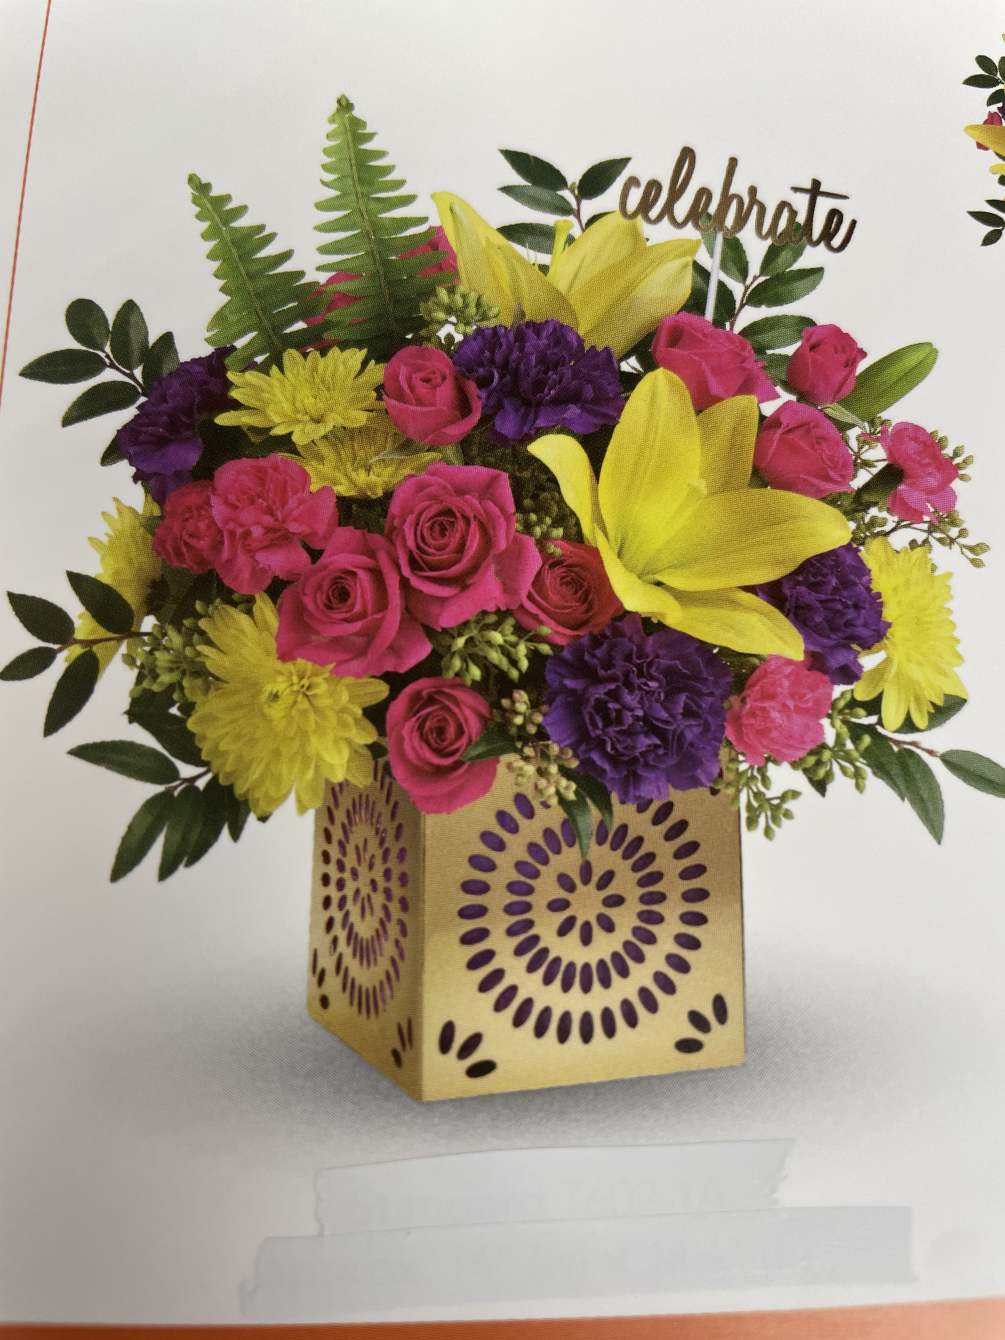 This arrangement may contain roses, carnations, lilies, chrysanthemums, huckleberry, or others. Standard